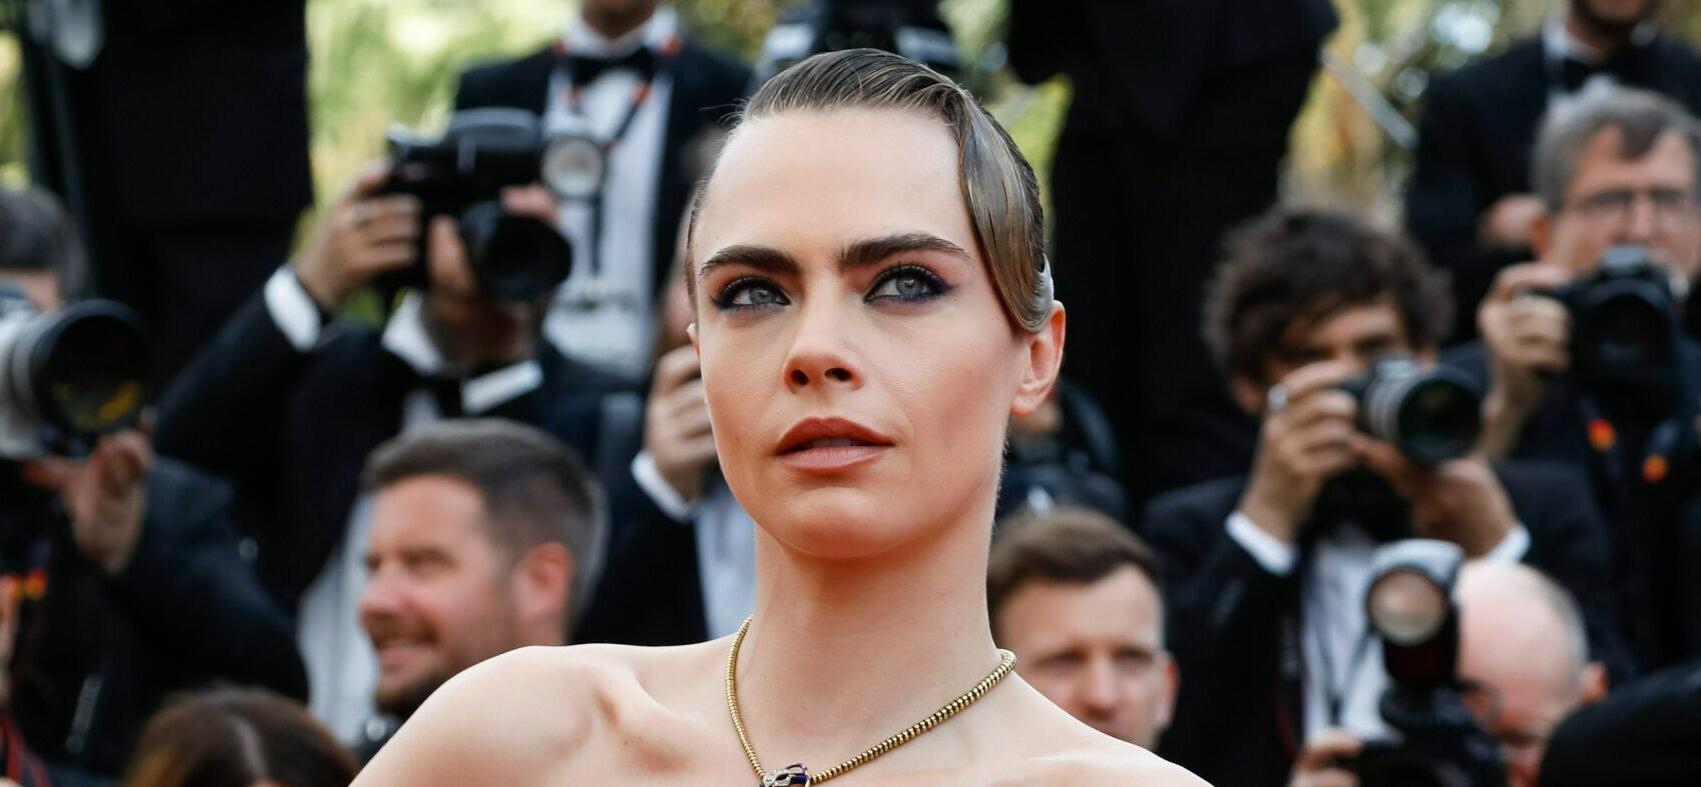 Cara Delevingne at the 2022 Cannes Film Festival